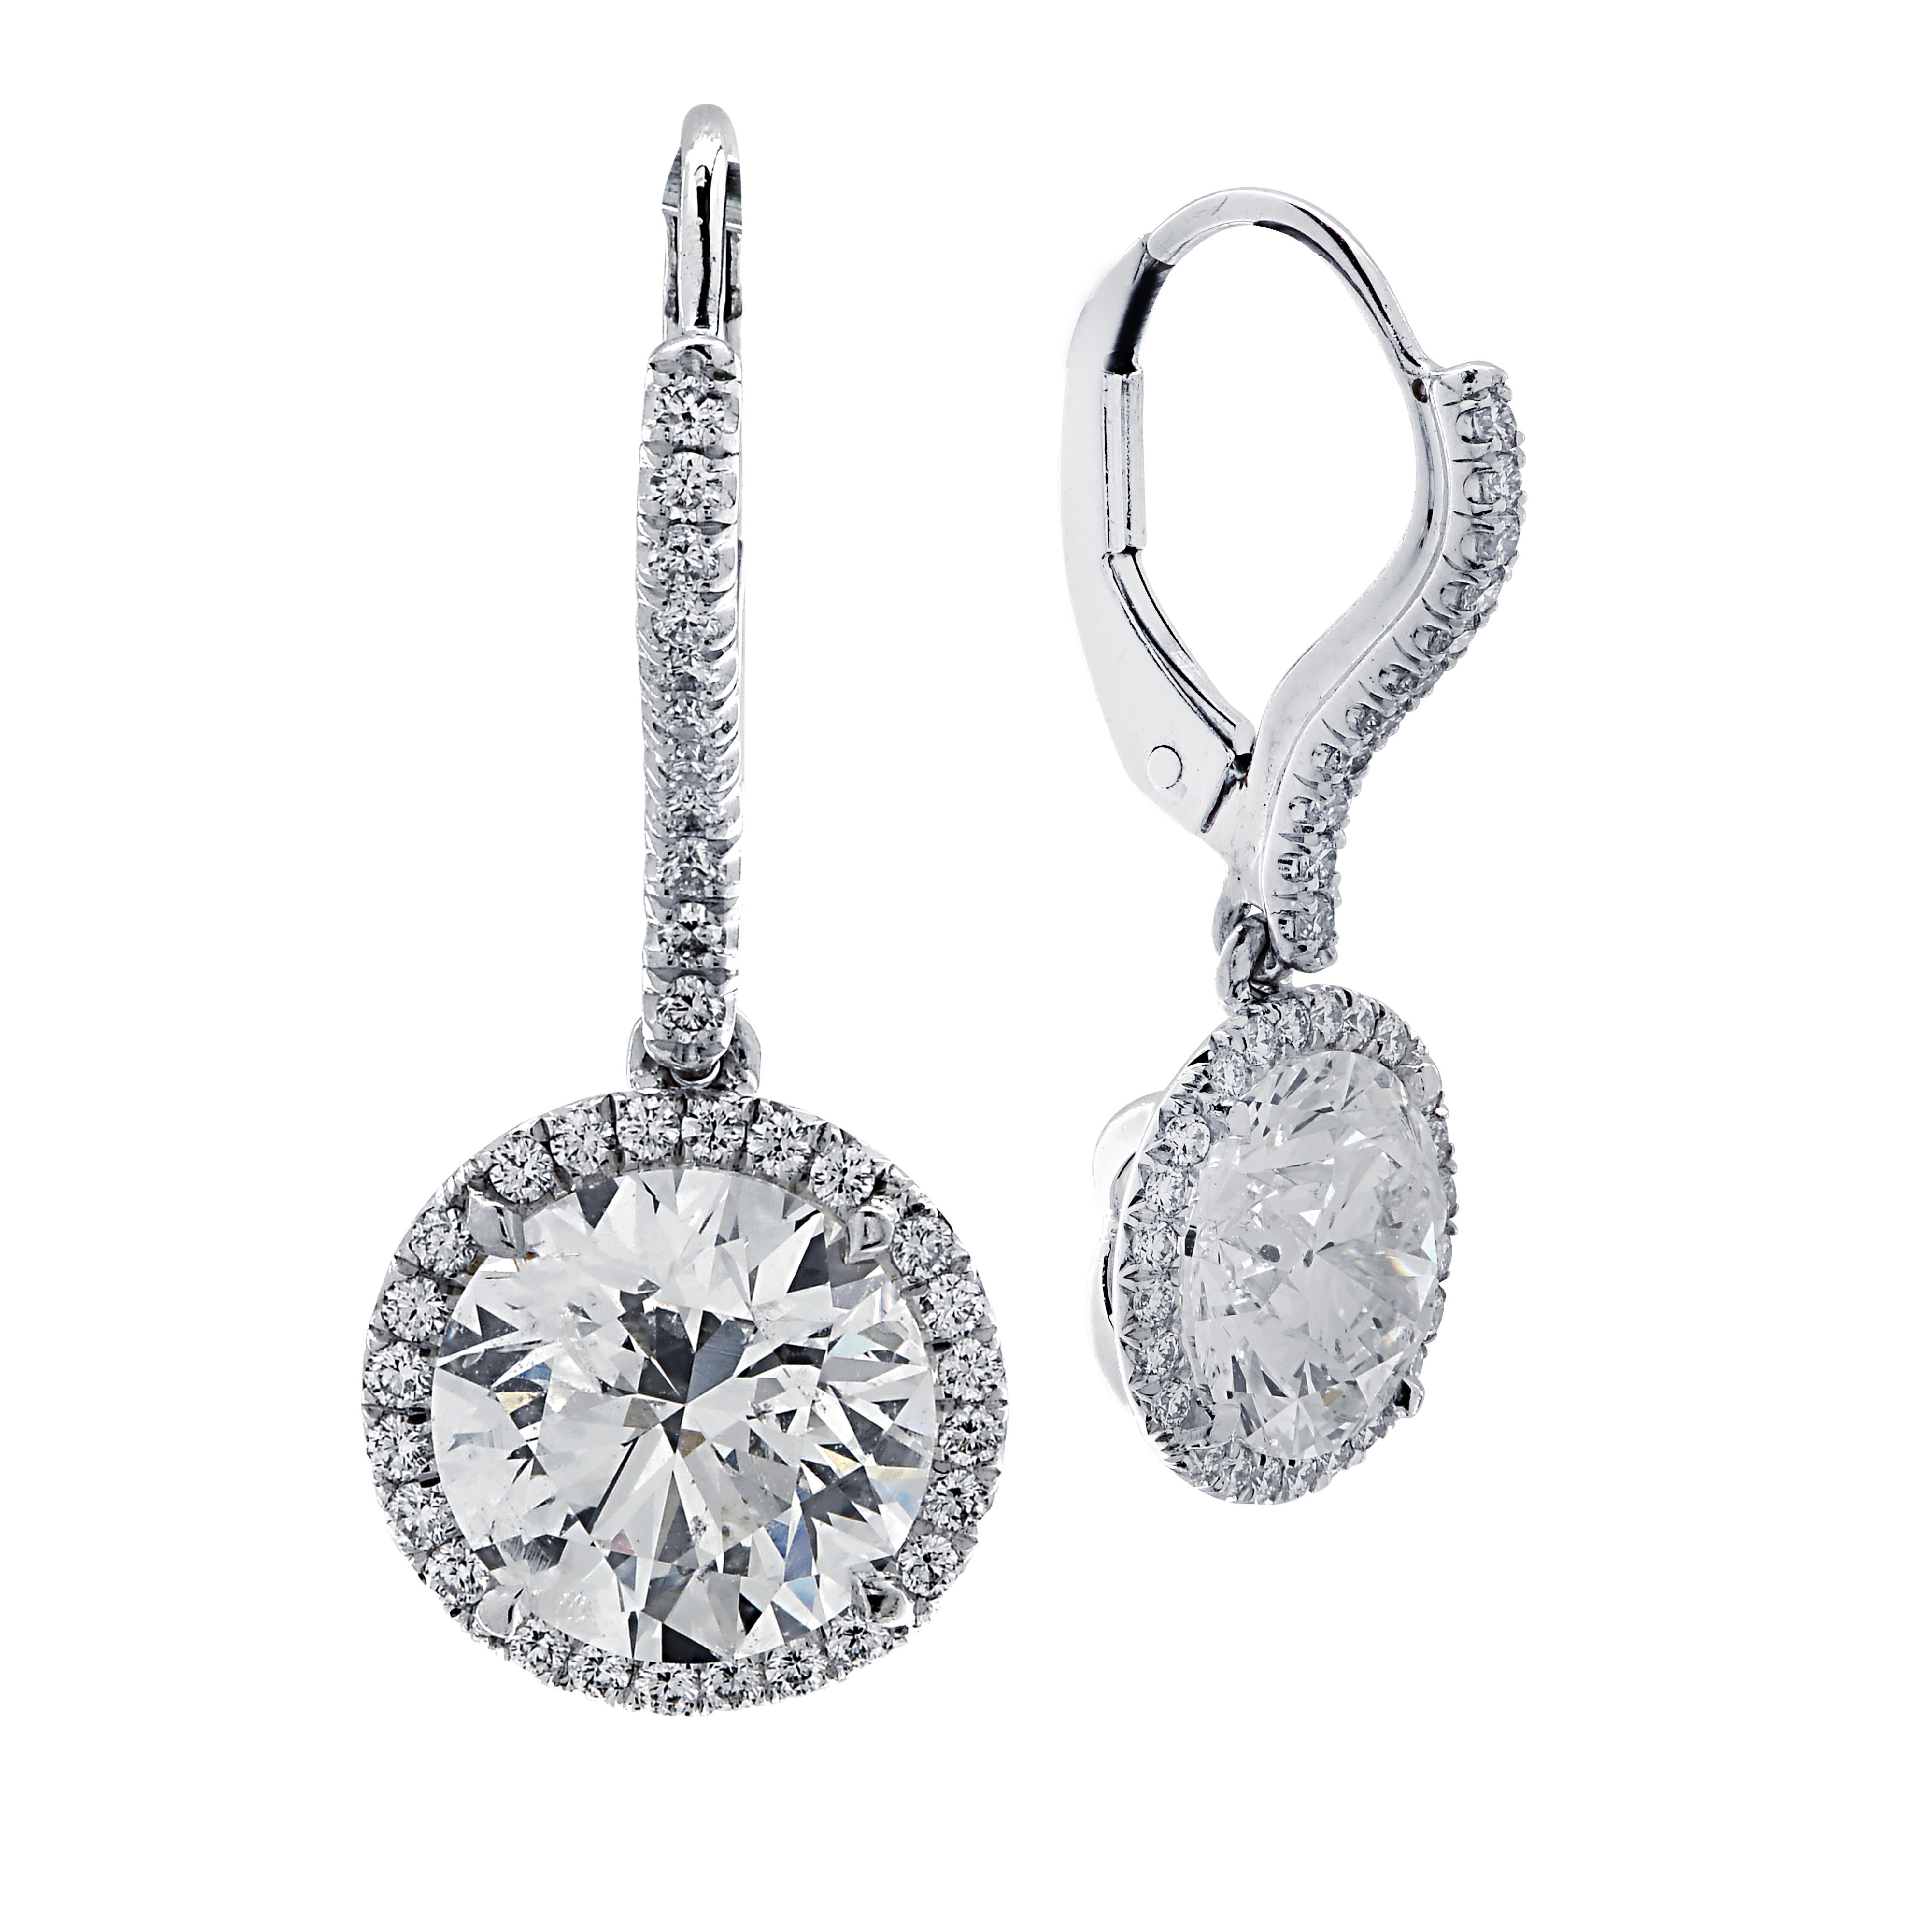 Sensational Vivid Diamonds dangle earrings crafted in 18 karat white gold showcasing two round brilliant cut diamonds weighing 3 carats total, I color, I1 clarity framed in diamond halos and suspended from diamond encrusted posts. 70 round brilliant